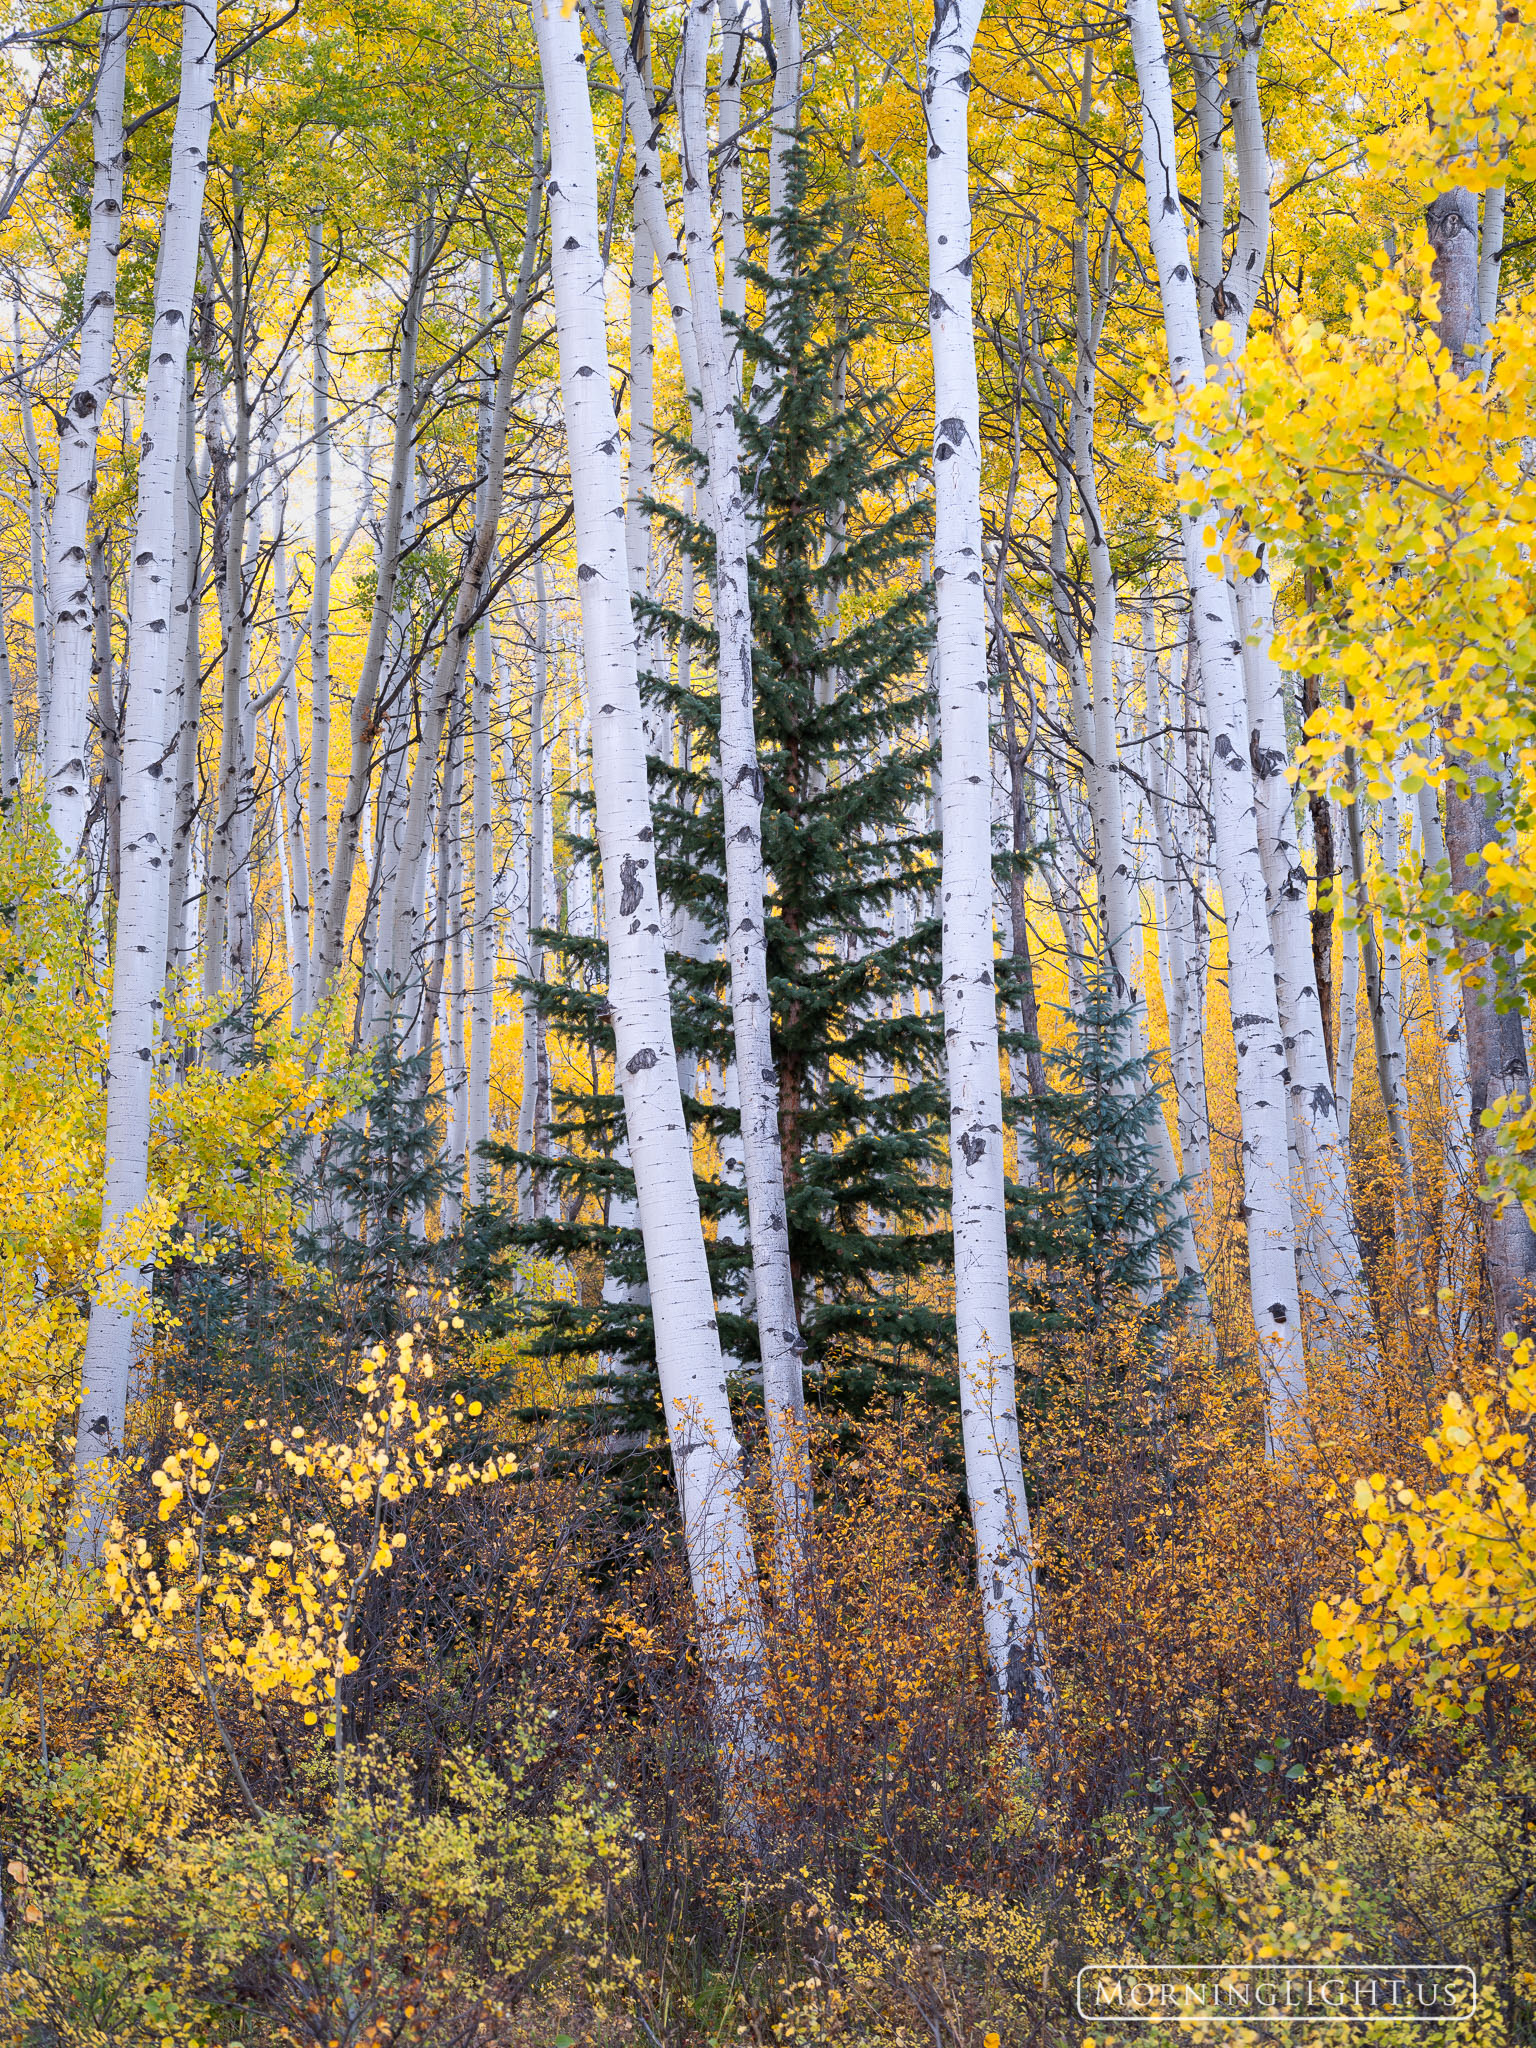 An elegant spruce tree looks out from behind the bars of aspen trees during the height of autumn color.